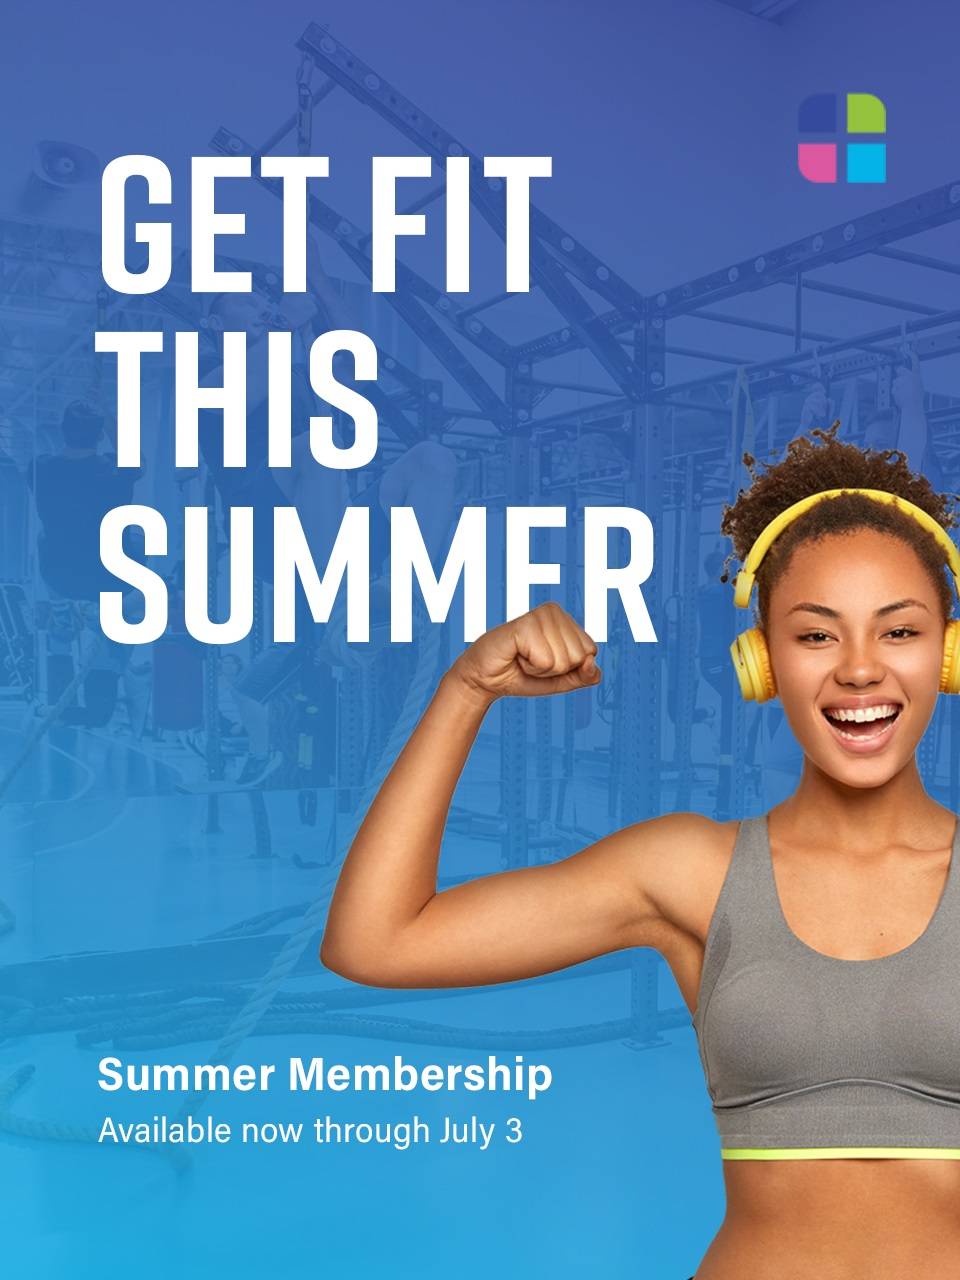 Summer Membership at Courts Plus available through July 3